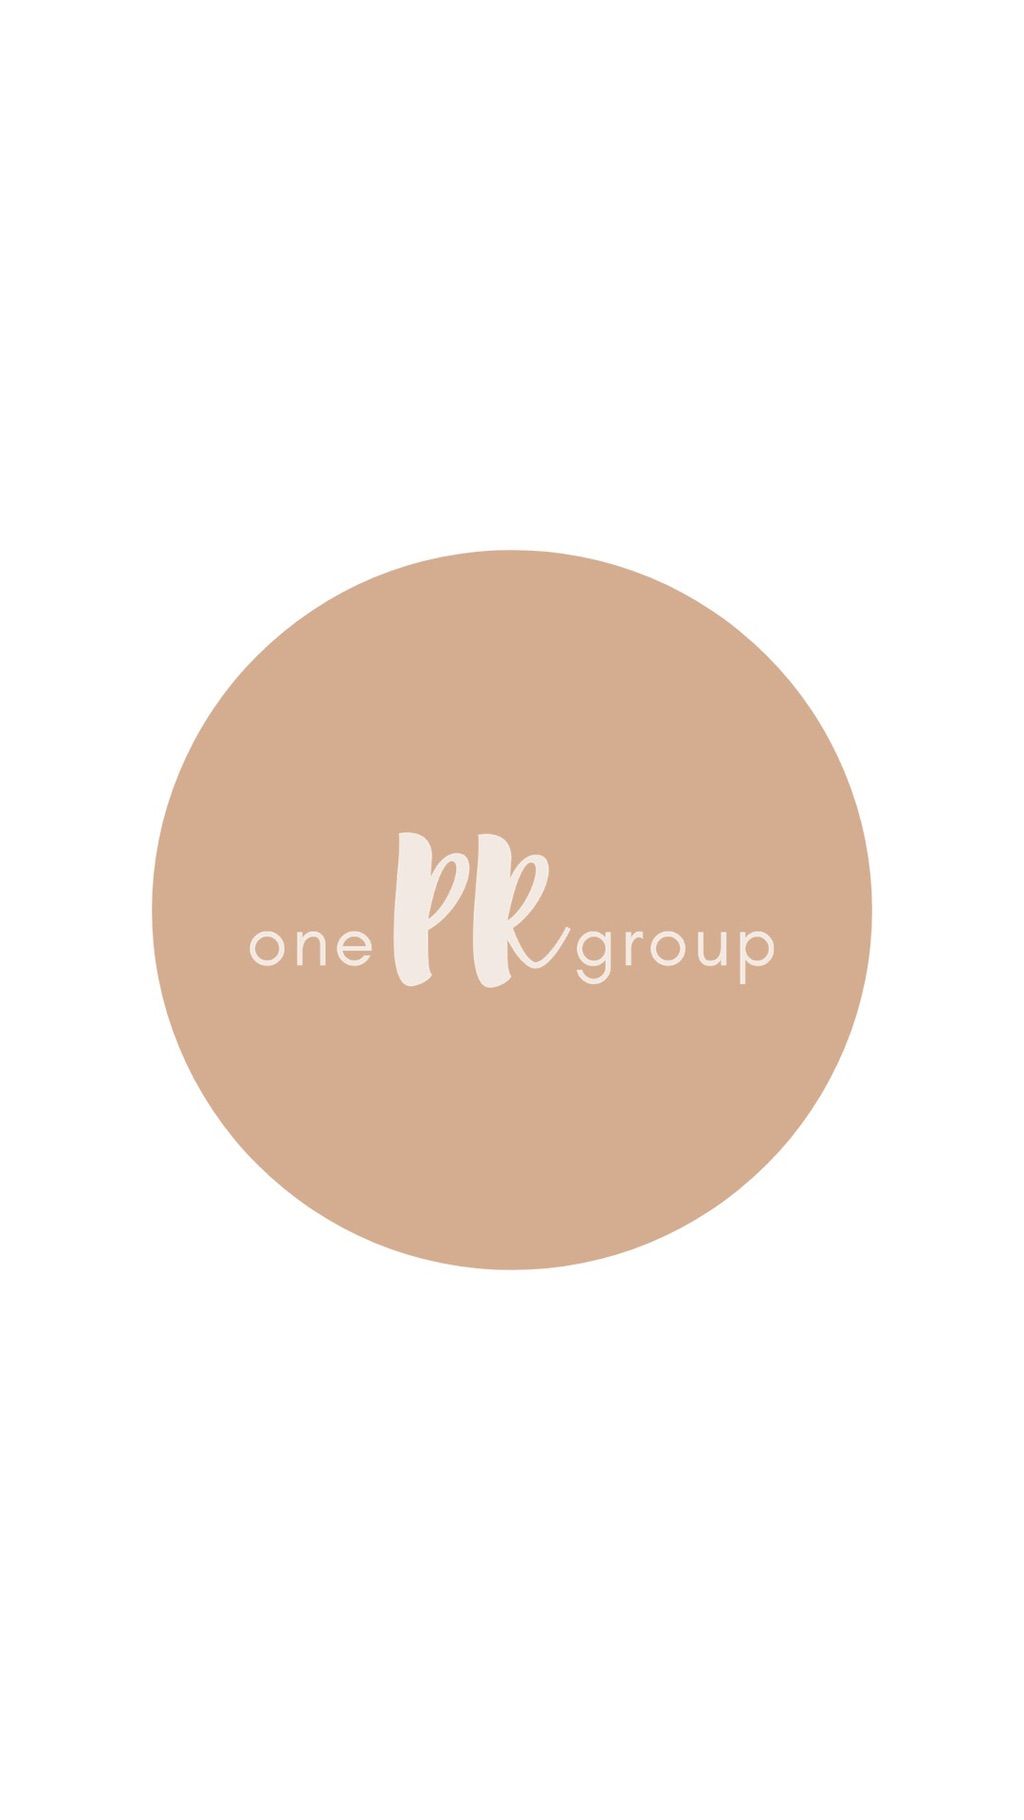 onePRgroup